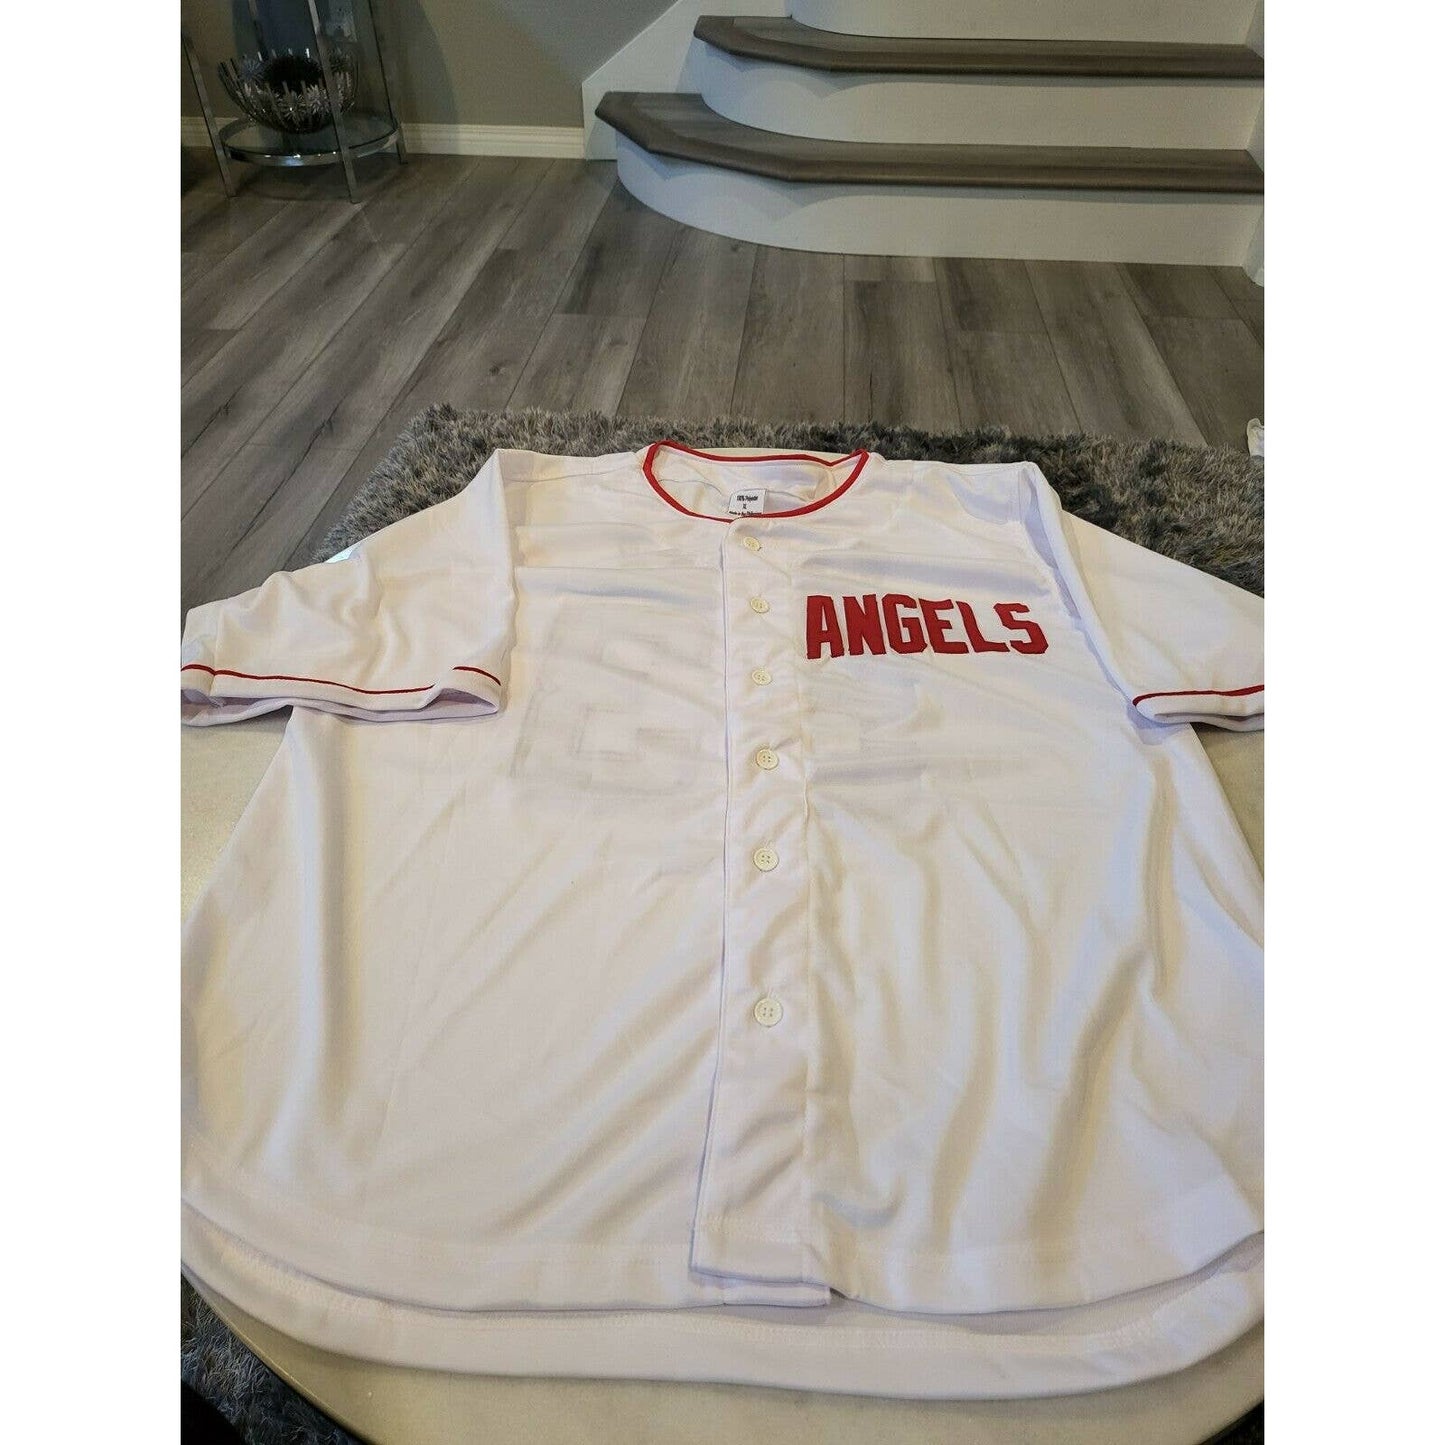 Trevor Cahill Autographed/Signed Jersey Sticker Los Angeles Angels - TreasuresEvolved